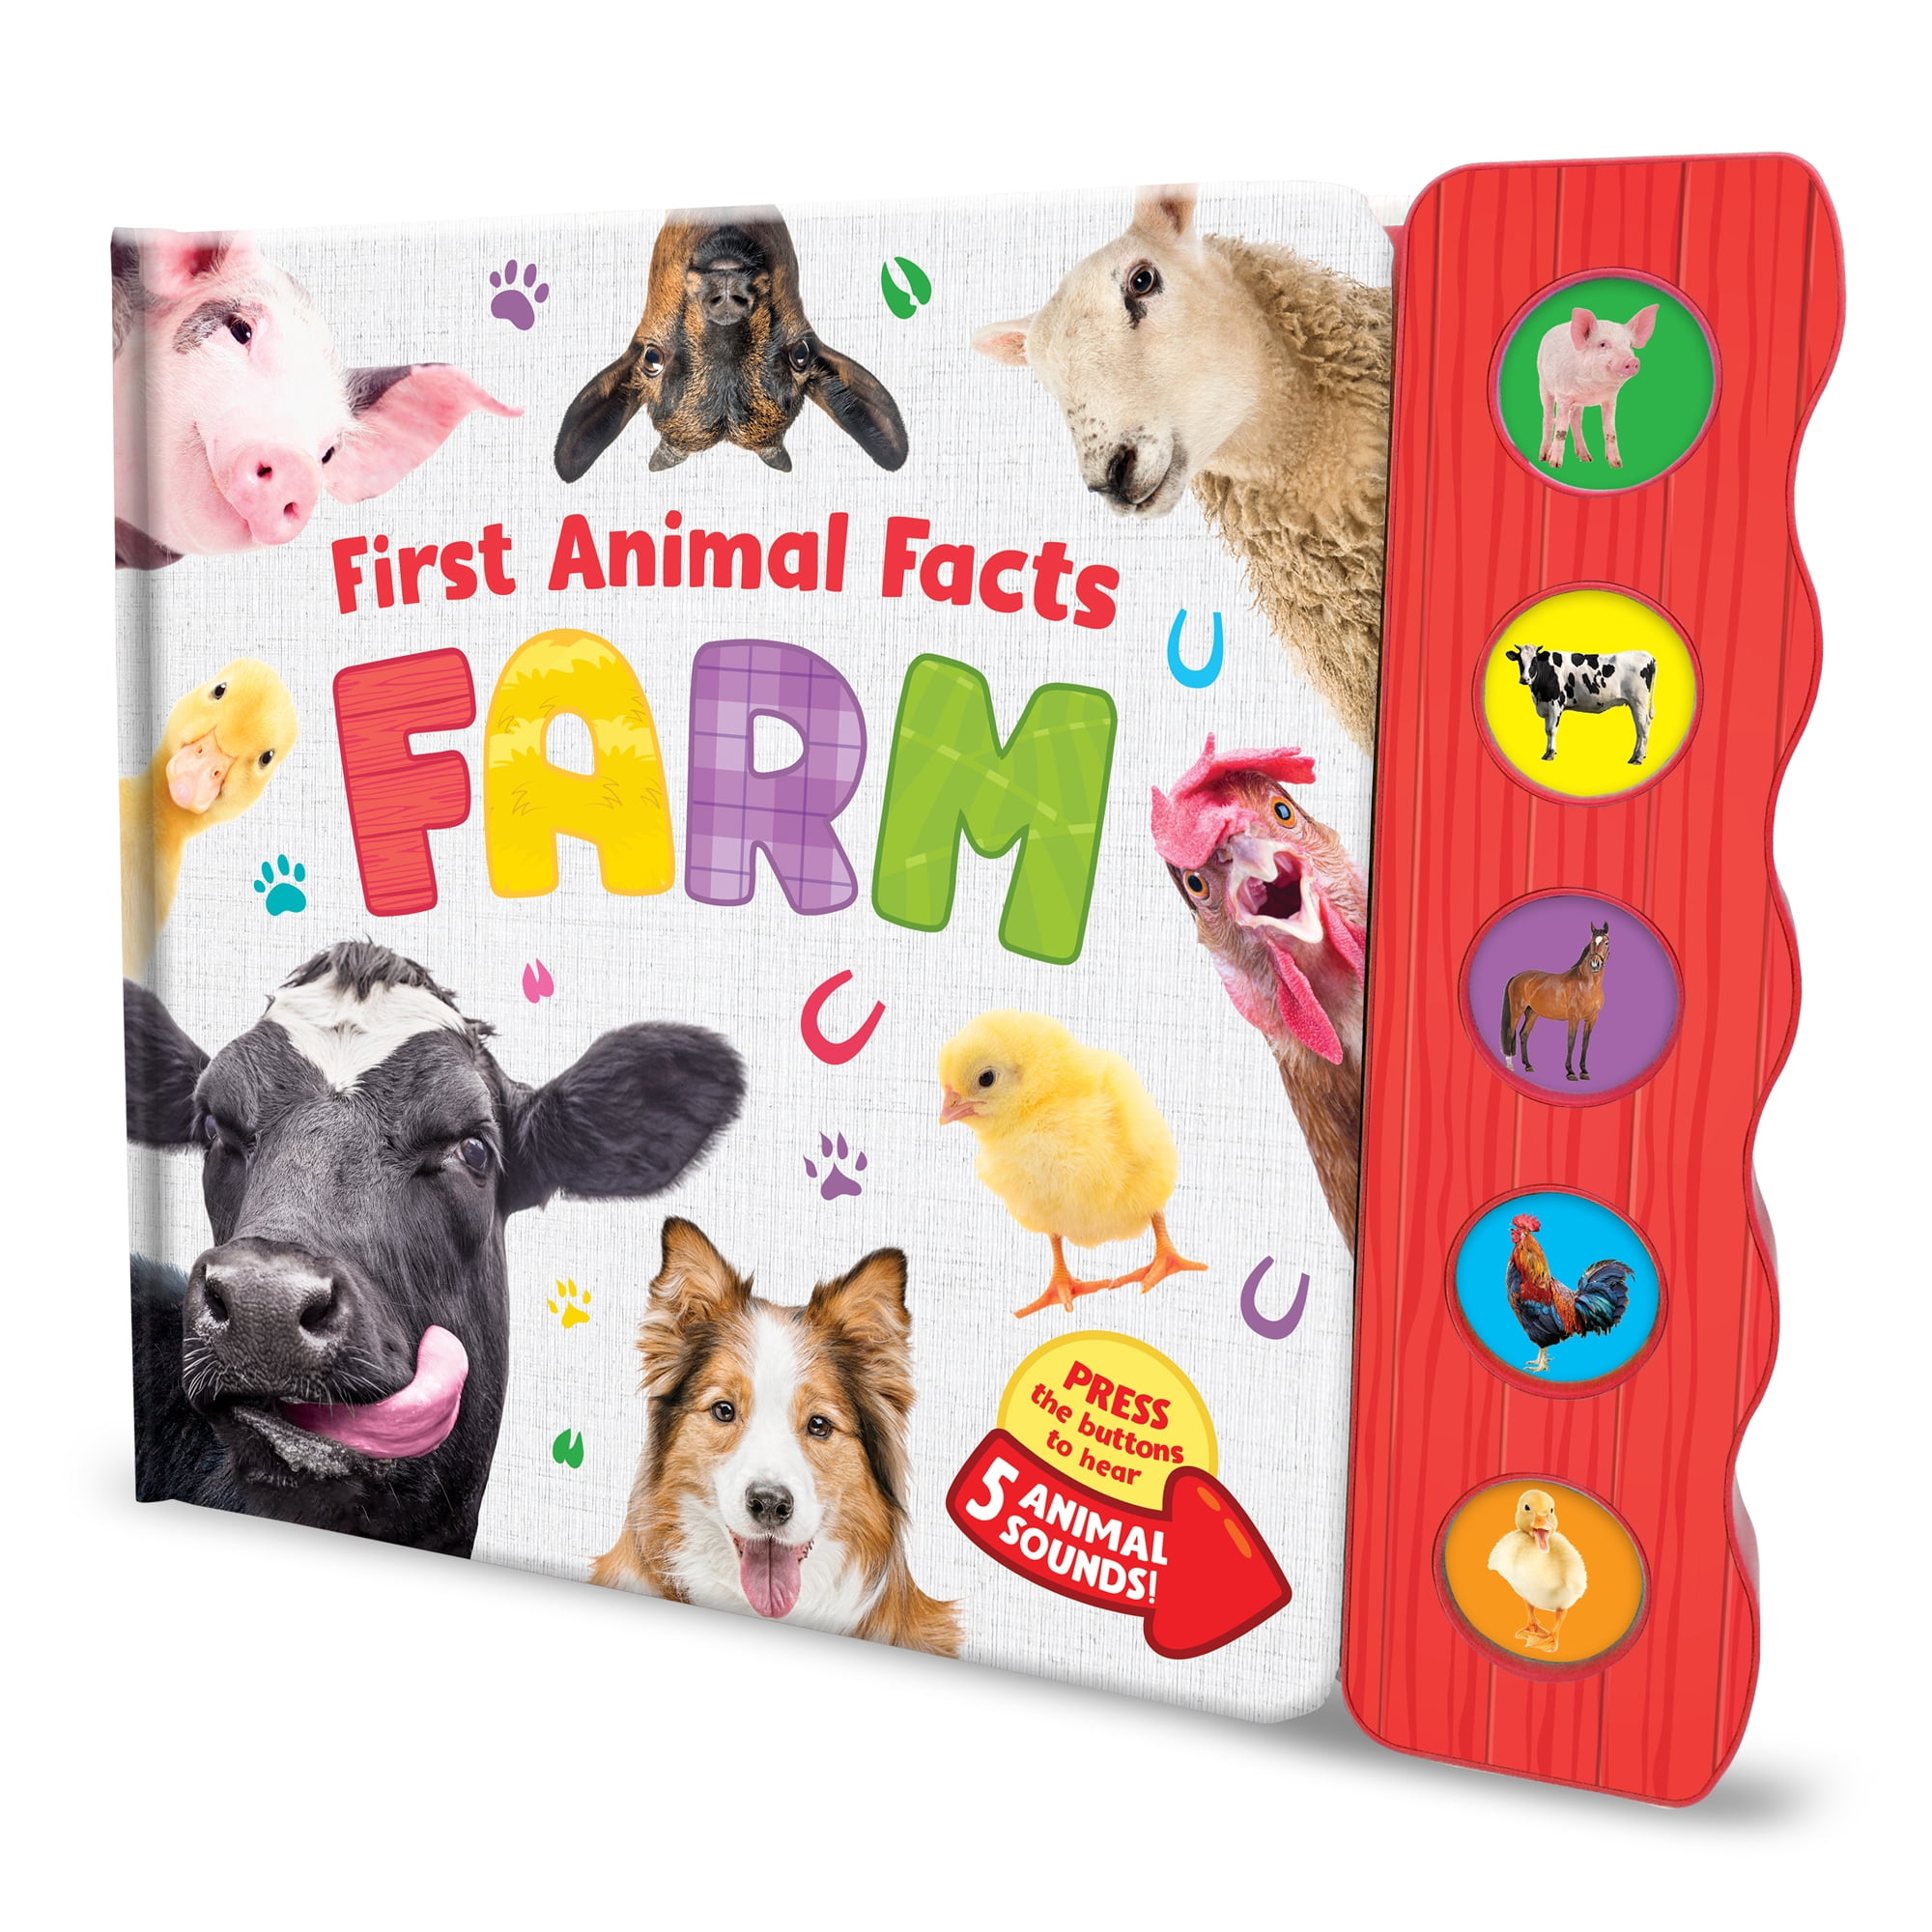 First Animal Facts Farm 5 Button Sound 